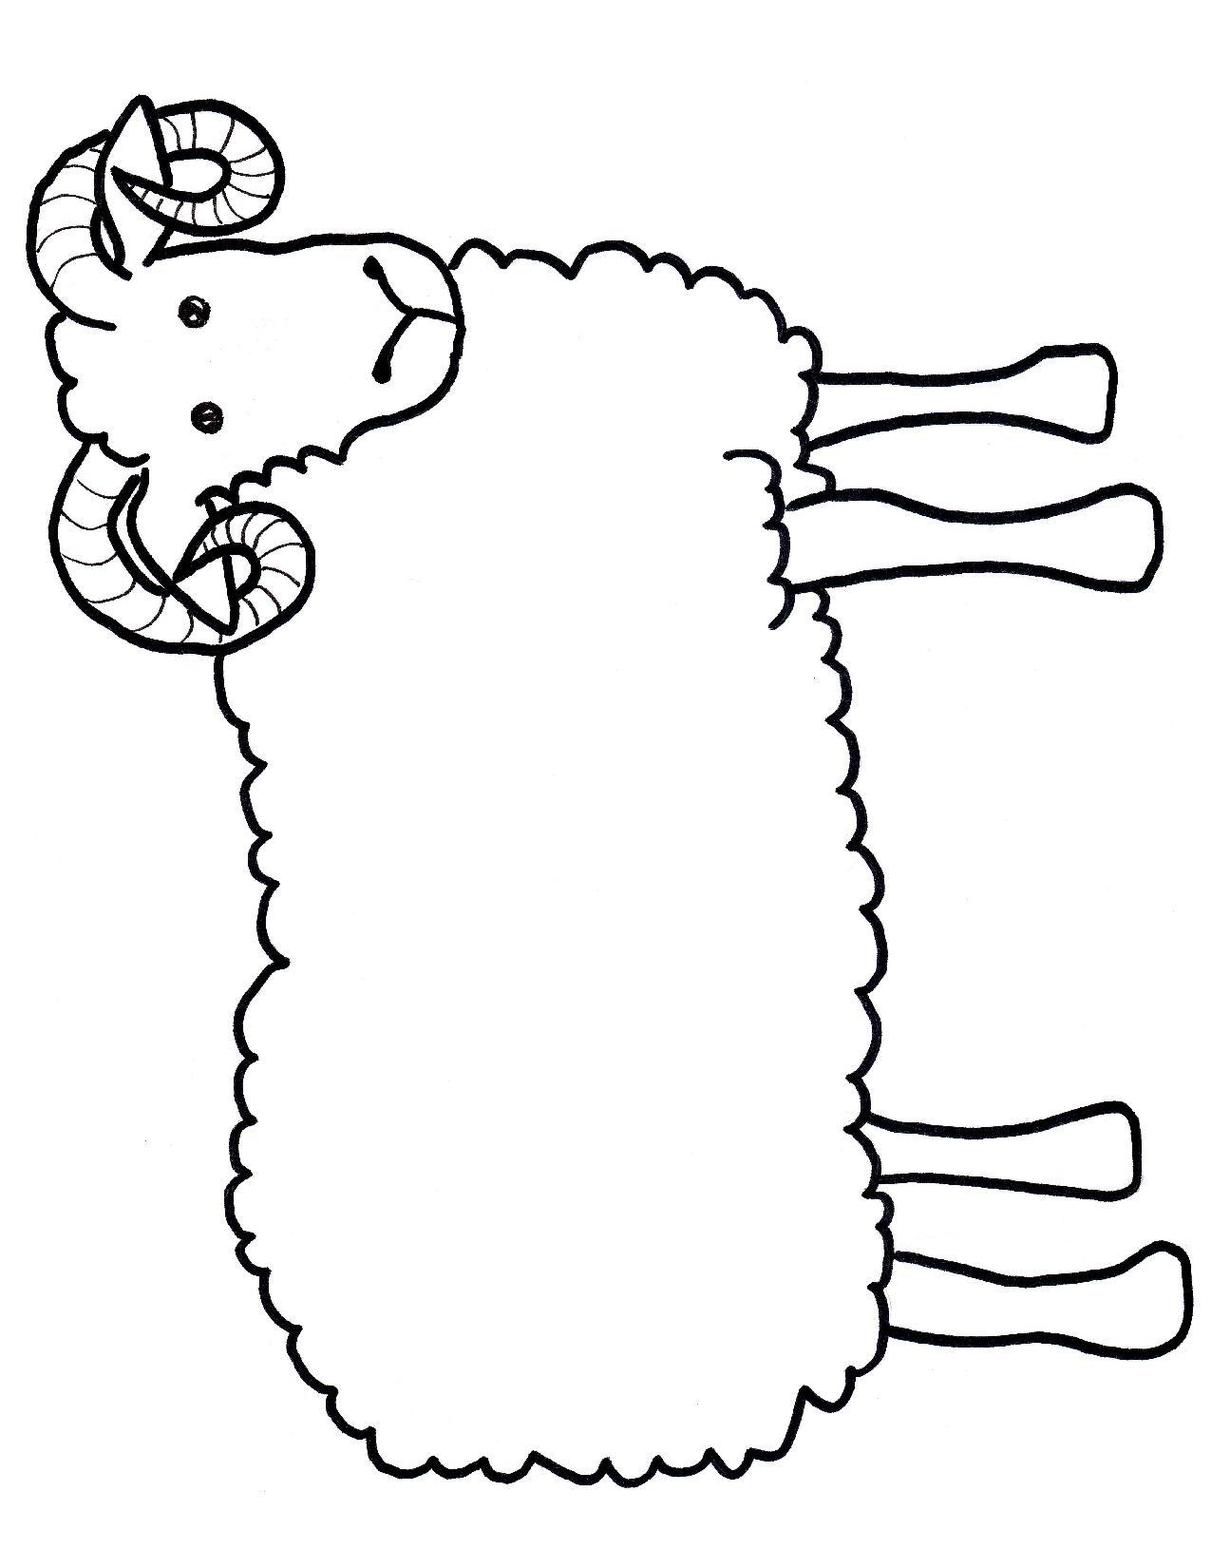 Ram clipart free download clip art on 